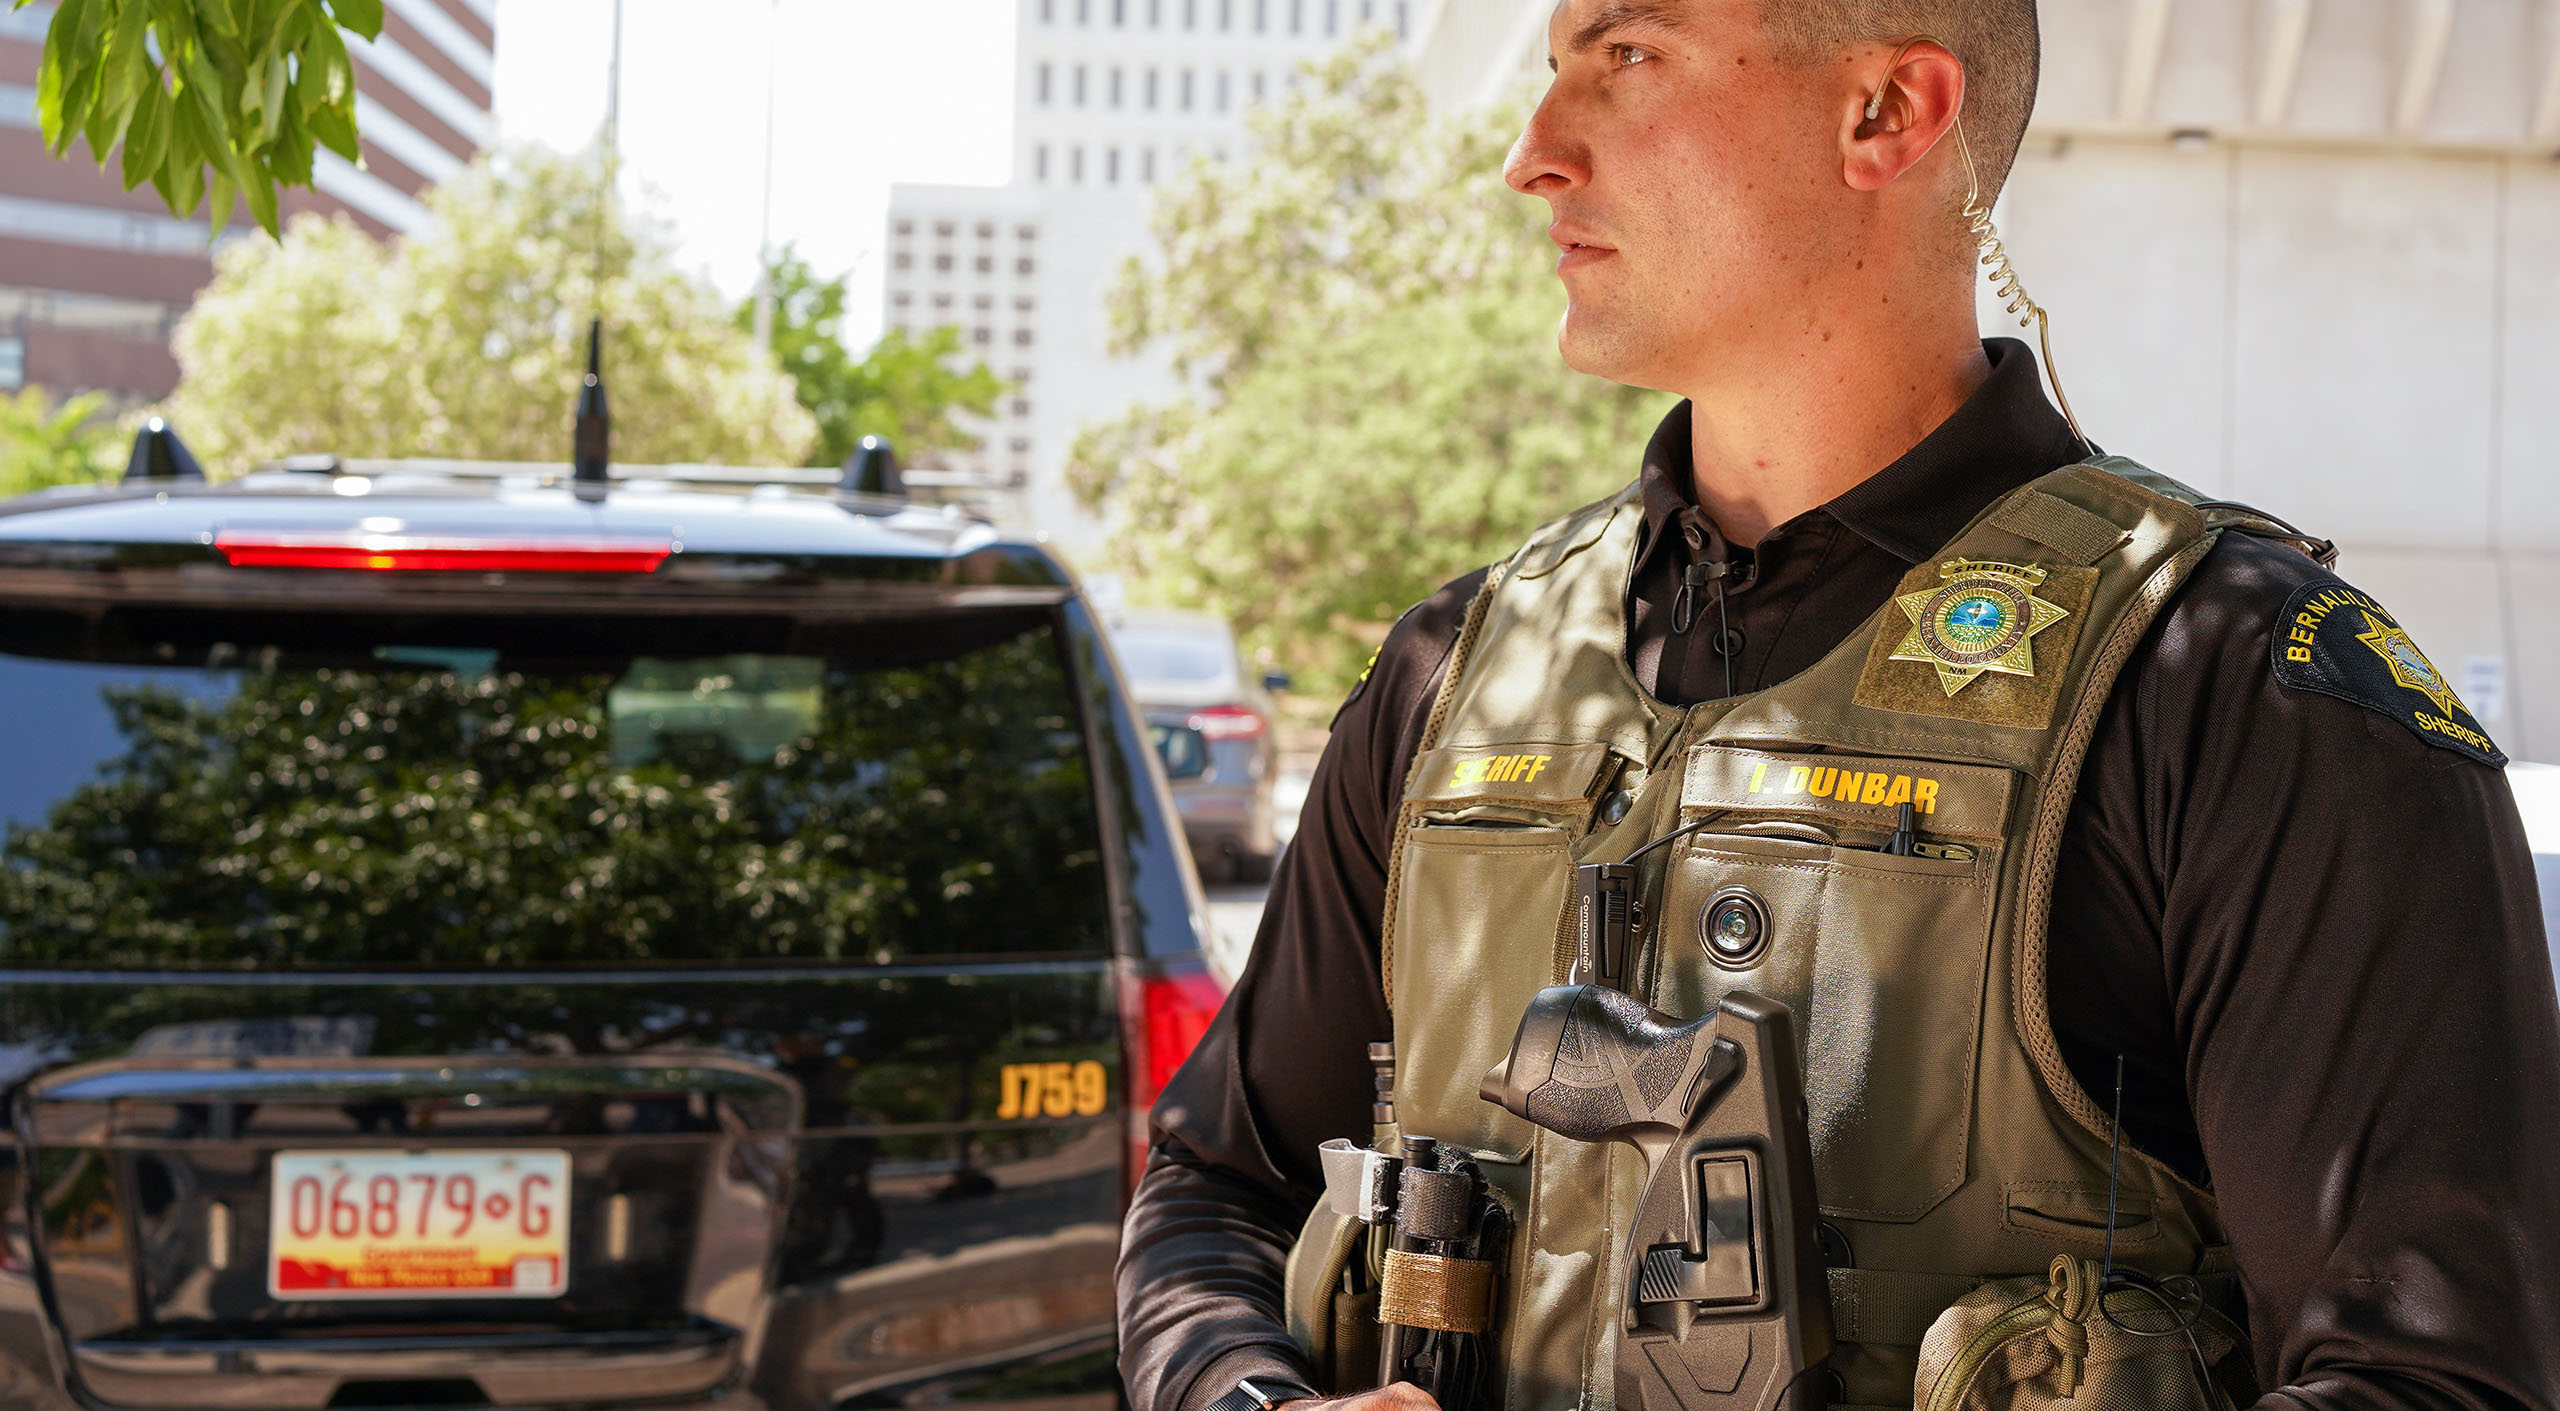 Five Benefits of Police Body Cameras that Most People Don’t Know